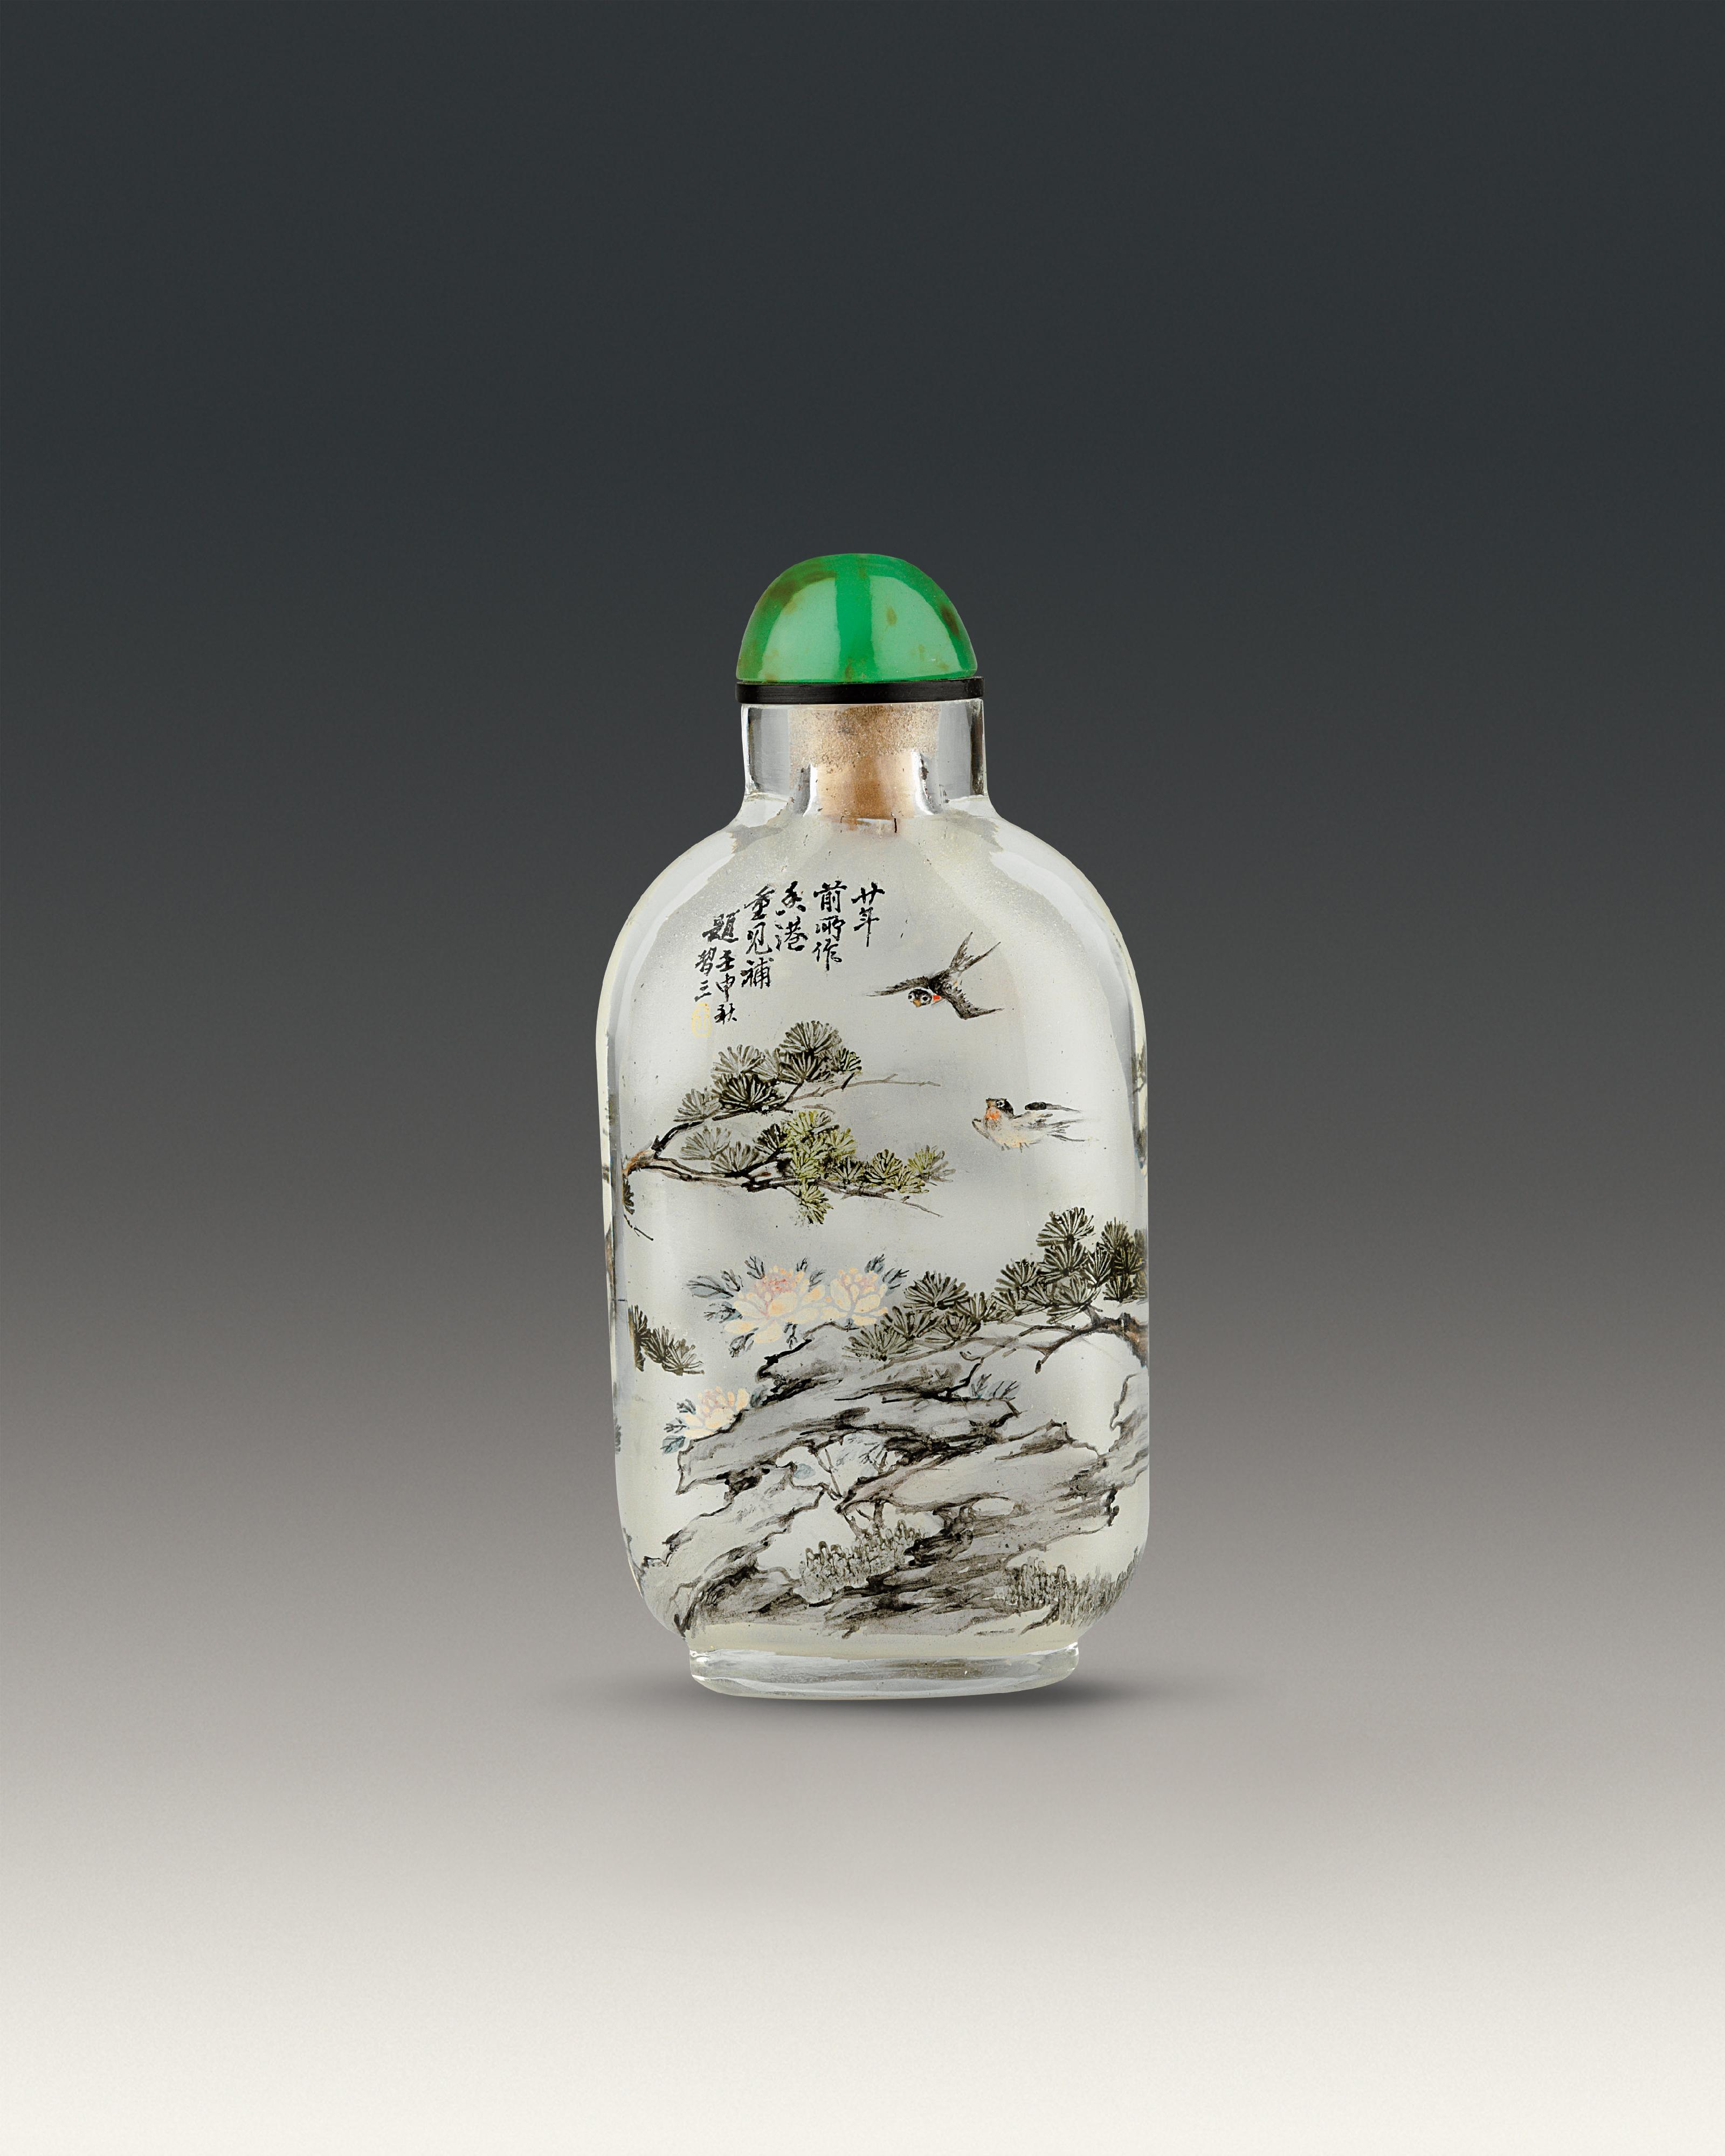 The Hong Kong Museum of Art today (September 28) announced that Christopher and Josephine Sin generously donated nearly 500 pieces of Chinese snuff bottles from the Fuyun Xuan Collection of Chinese Snuff Bottles for the museum's permanent collection. Picture shows the newly donated glass snuff bottle inside-painted with flowers and birds design, painted by Wang Xisan in 1968. Wang met Mr Sin in 1992 and added an inscription as a testament to the invaluable friendship between a collector and a master artisan.